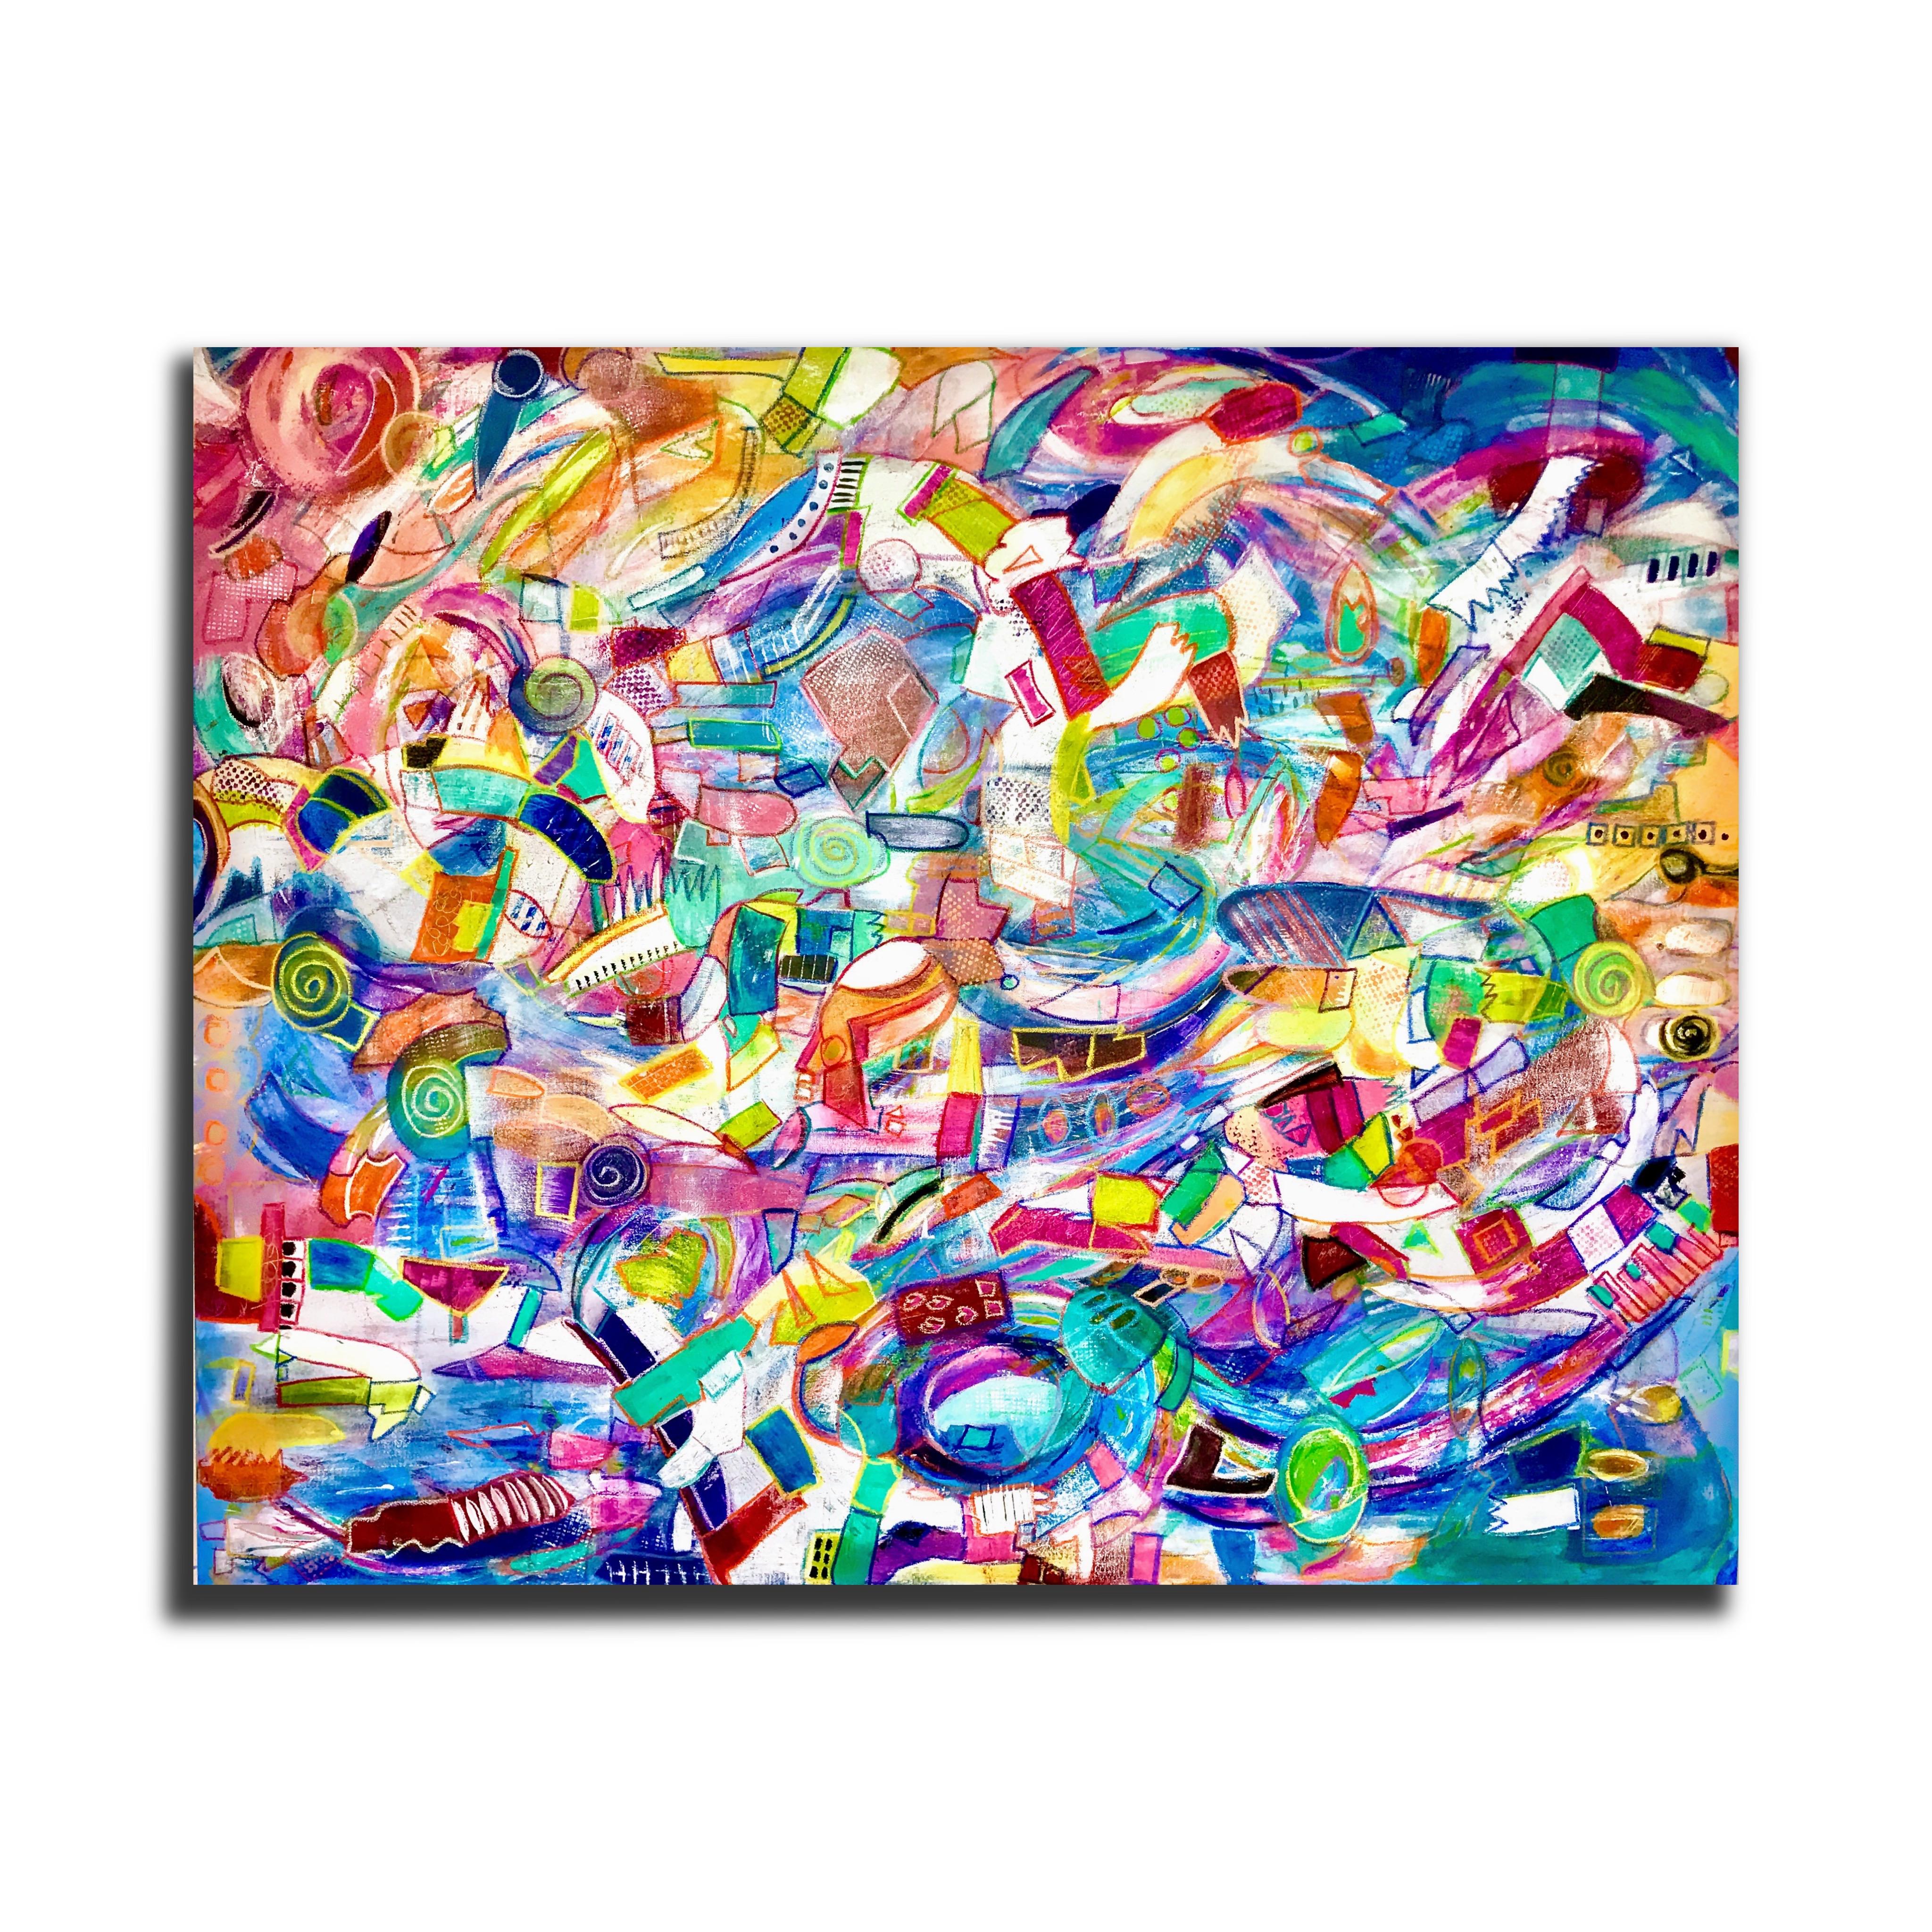 Kelley Carman Abstract Painting - Vortex (Abstract, Gestural, Pink, Blue, Green, White, Red, Yellow, Orange)